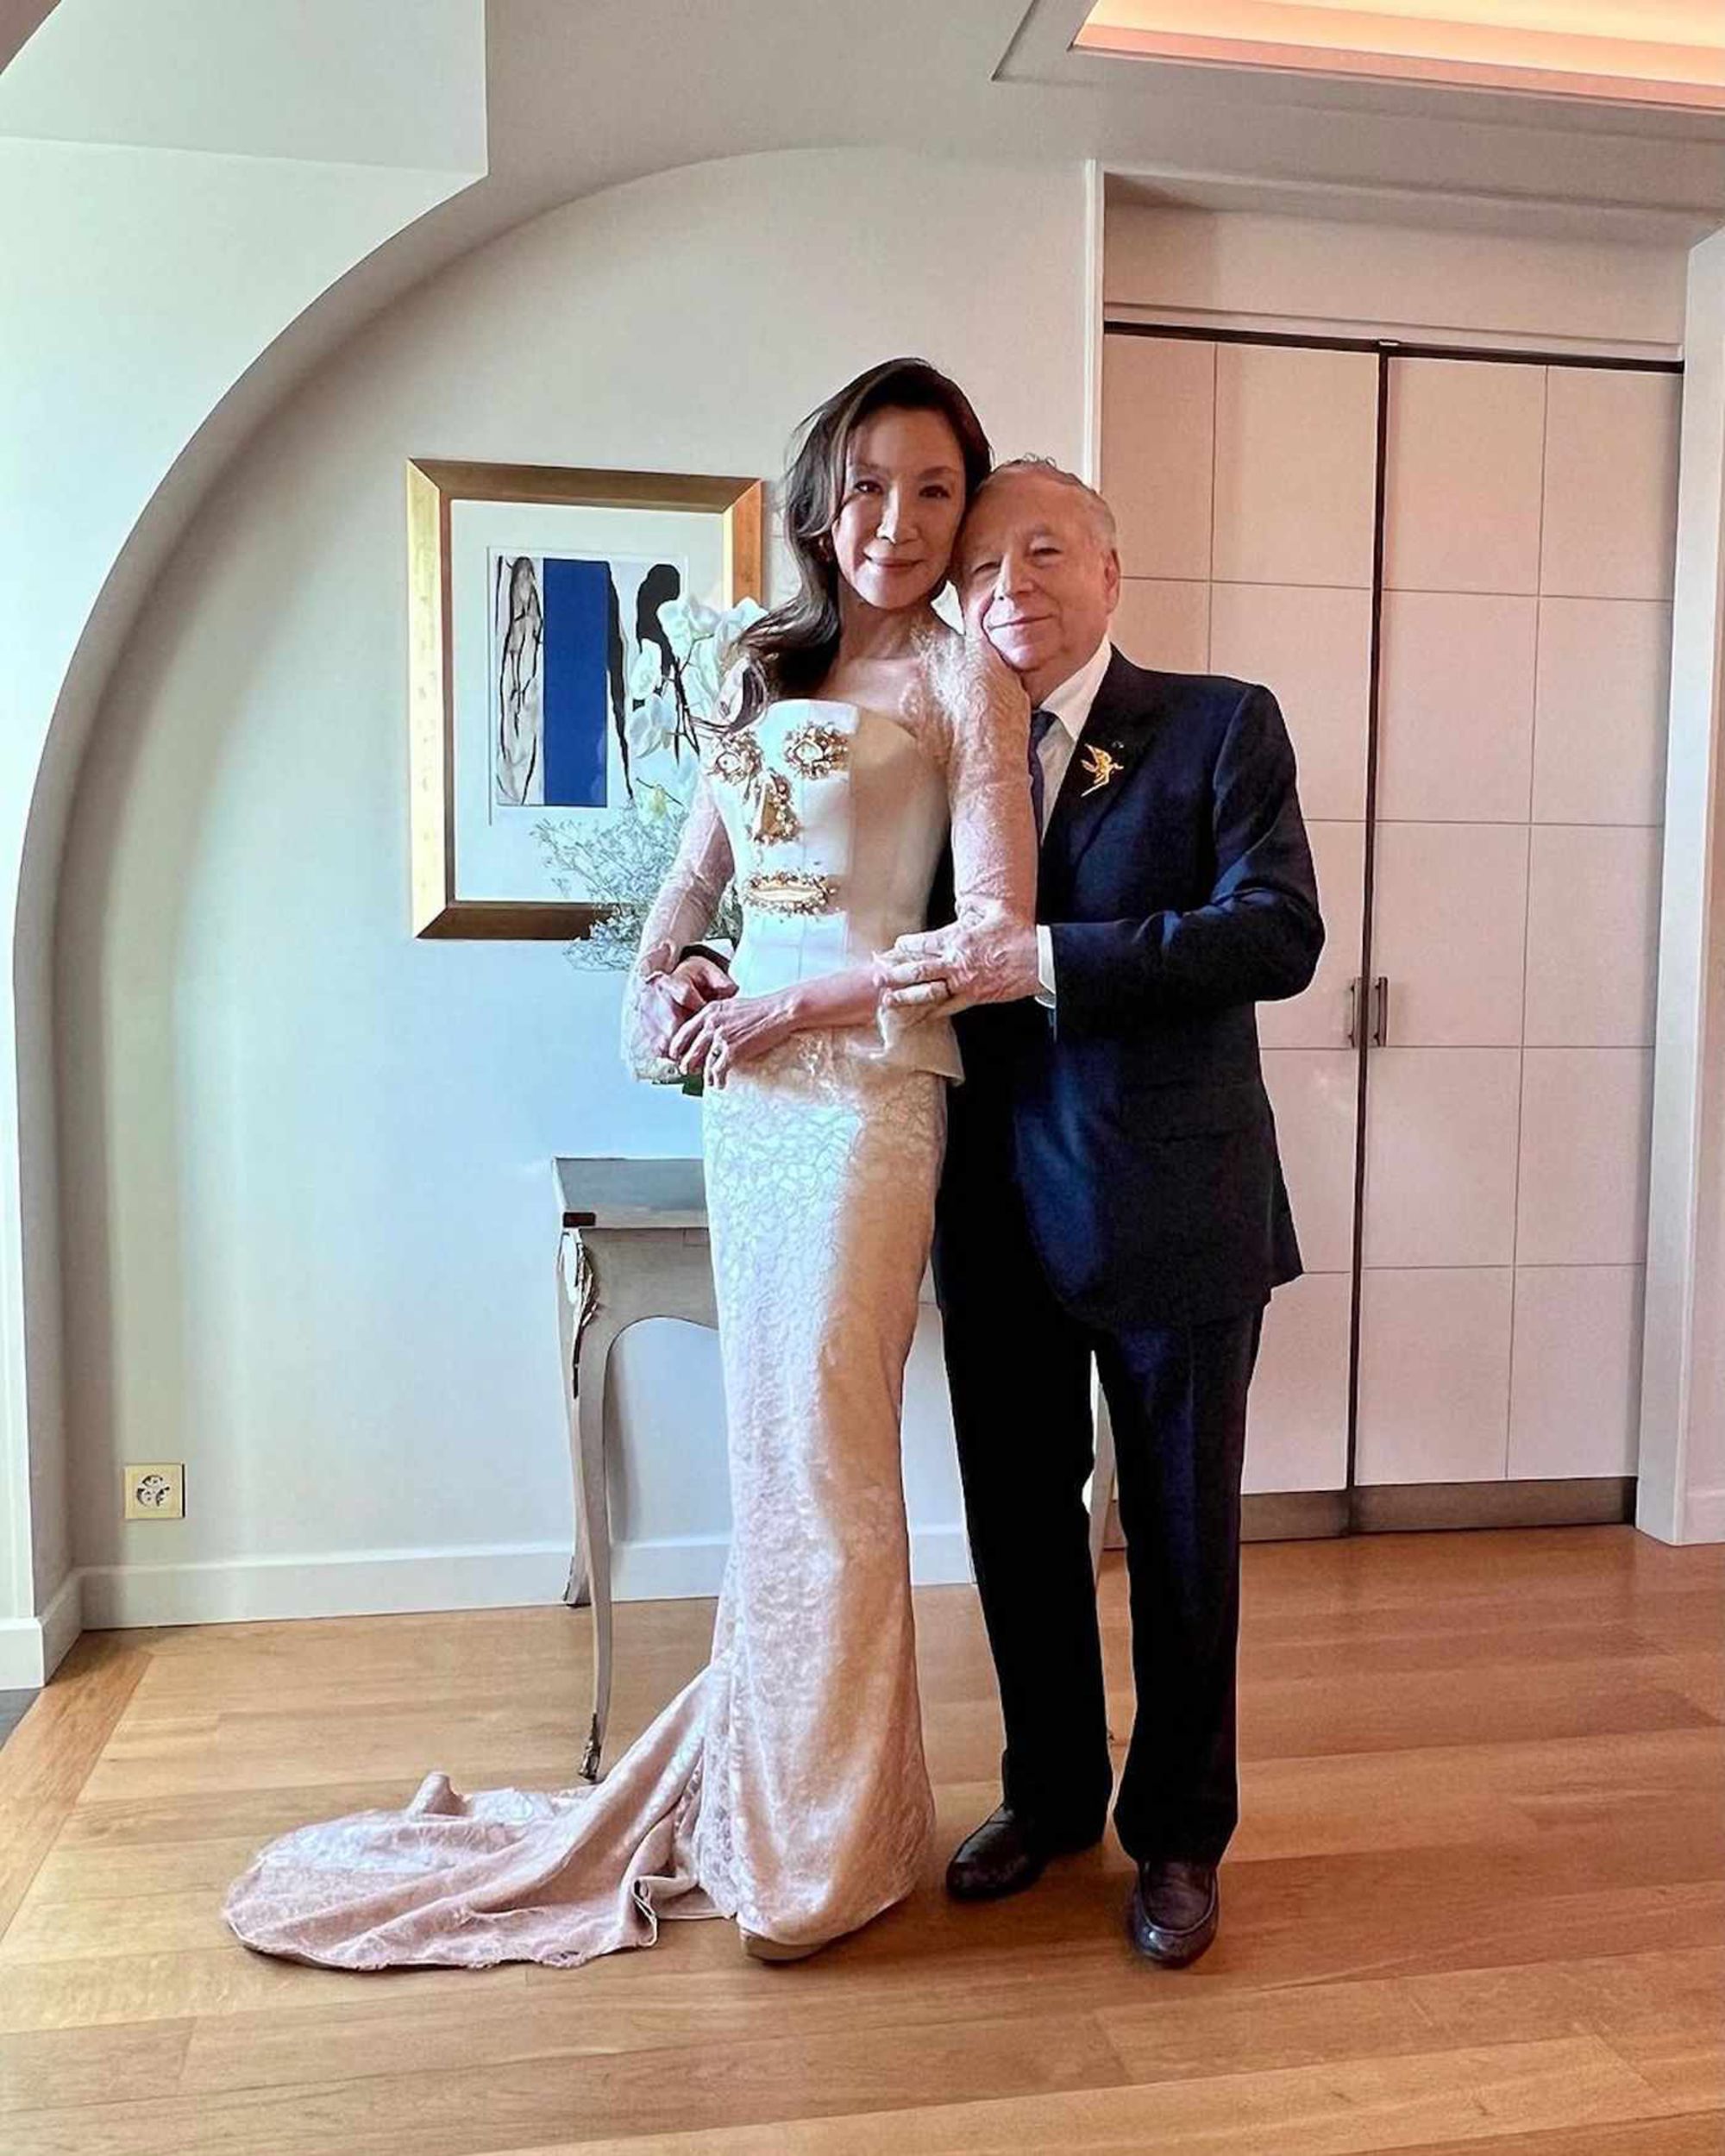 Michelle Yeoh wears a "face" bridal gown, designed by Schiaparelli.